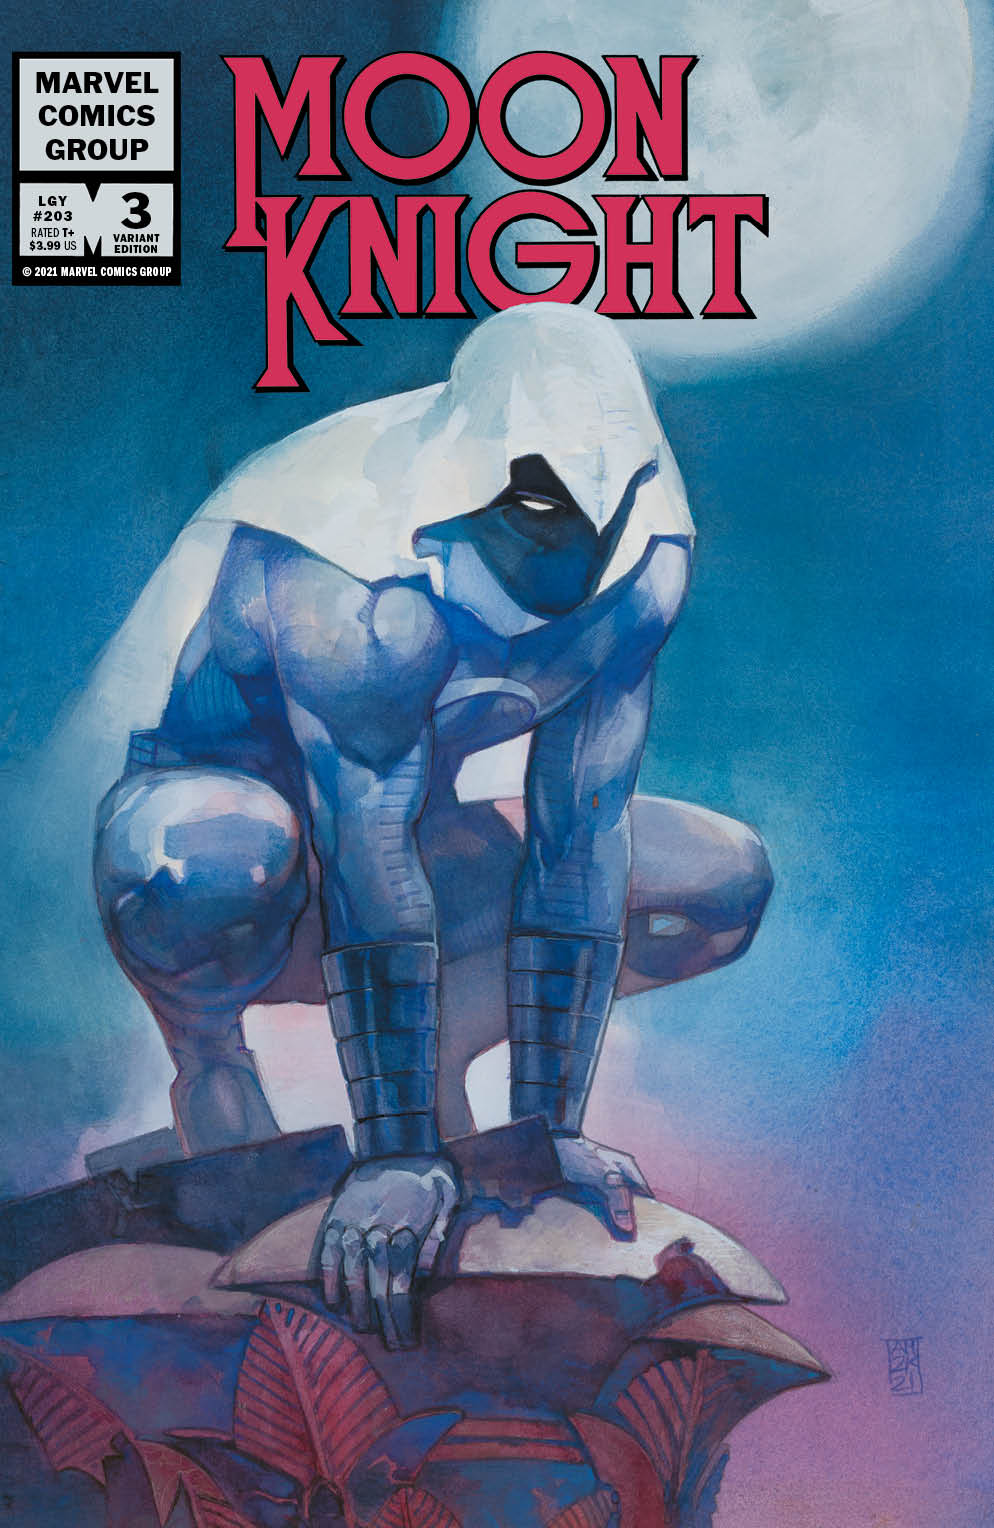 MOON KNIGHT #3 ALEX MALEEV EXCLUSIVE VARIANT 2021